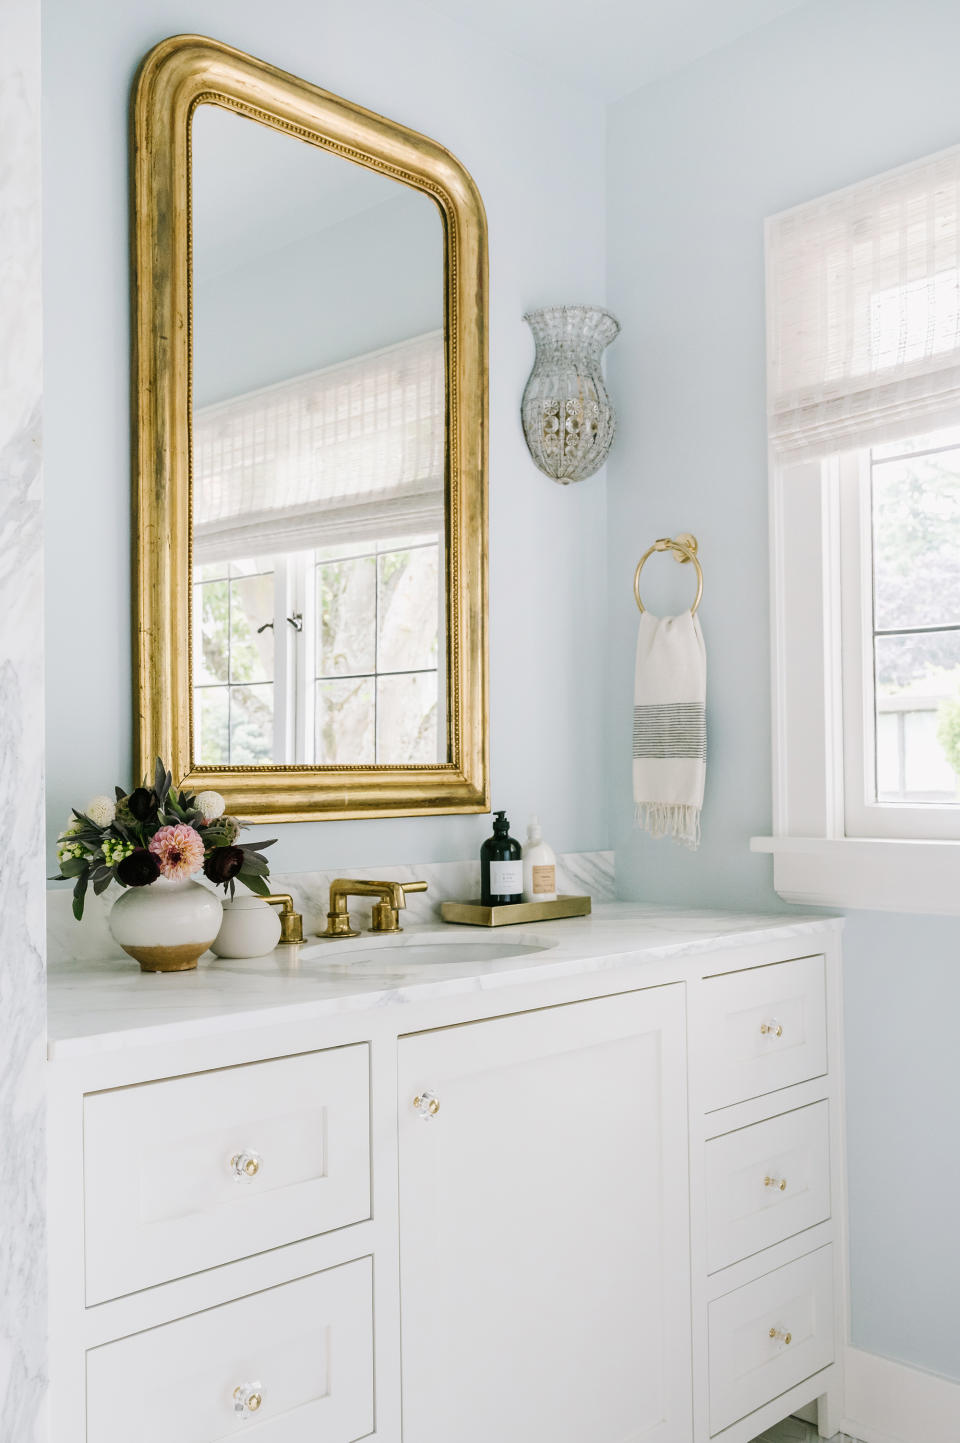 <p> With so many bathroom vanity ideas available, it can be hard to find the right fit for your space. &#x2018;A great way to refresh a tired bathroom is to opt for a vanity that looks like furniture, such as this dresser inspired vanity. Opt for a design that extends all the way to the side wall to ensure the maximum amount of usable counter space. Adding a mirror wall with sconces mounted above the vanity ensures plenty of reflected light,&#x2019; says Kristina Phillips. </p>